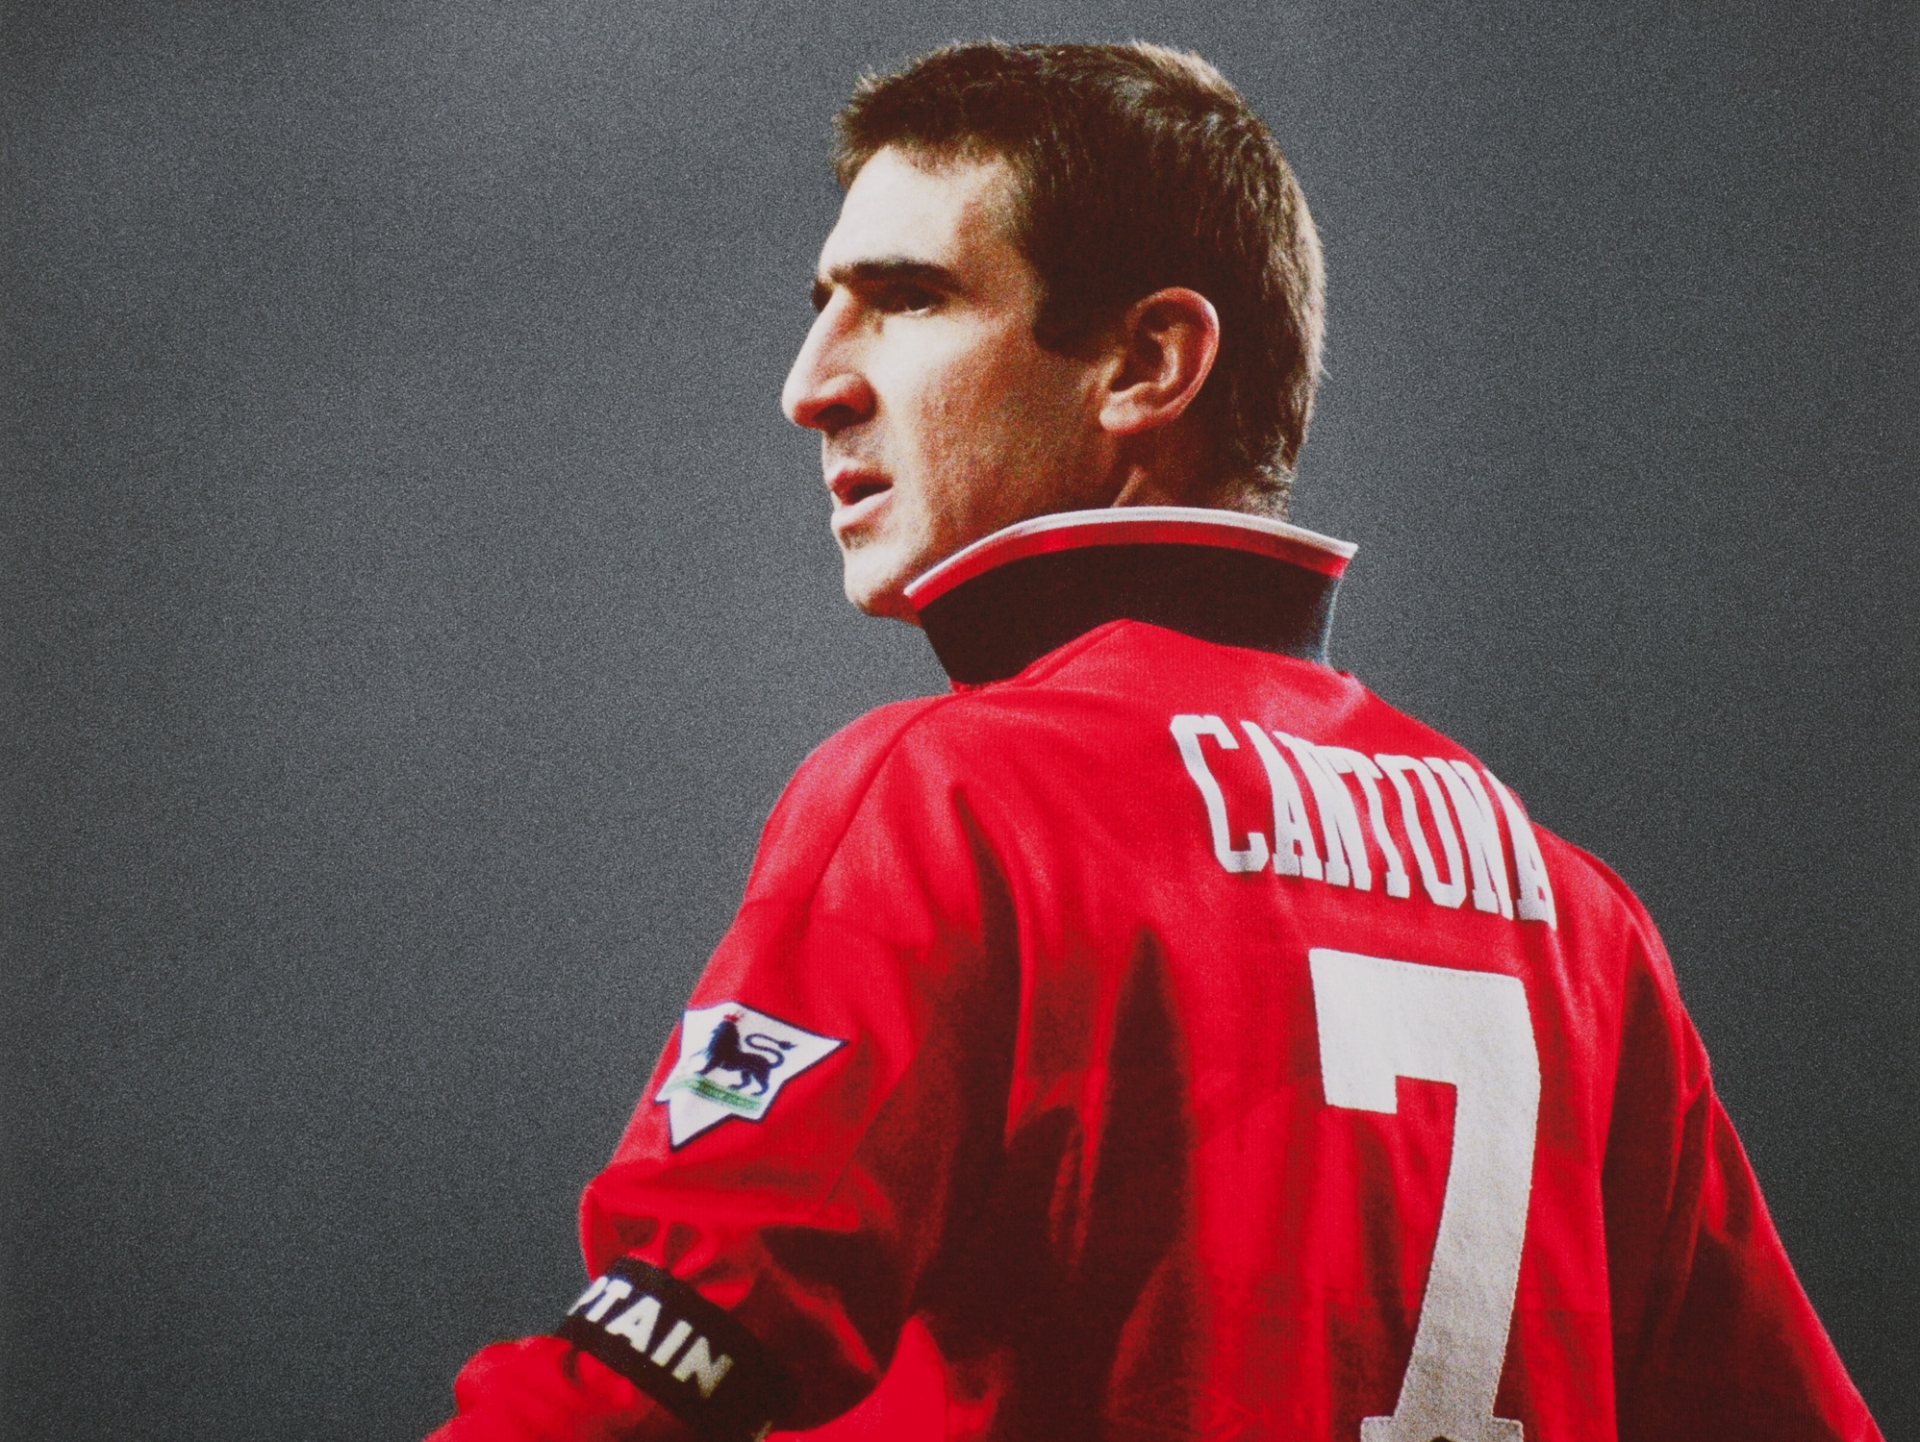 king-eric-cantona-is-number-seven-1742